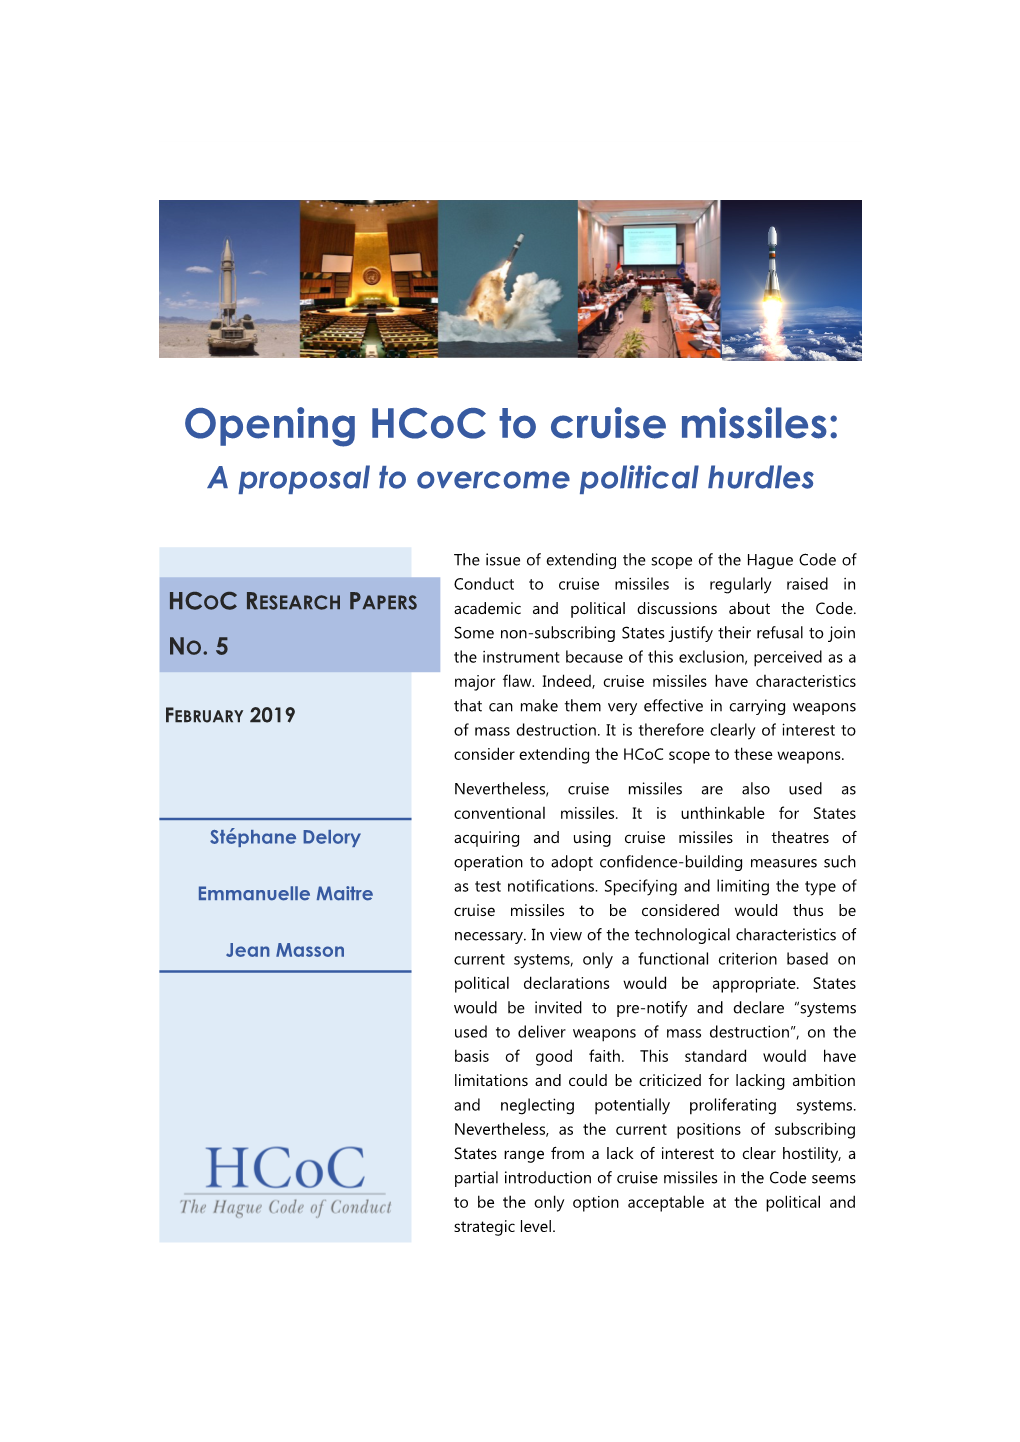 Opening Hcoc to Cruise Missiles: a Proposal to Overcome Political Hurdles